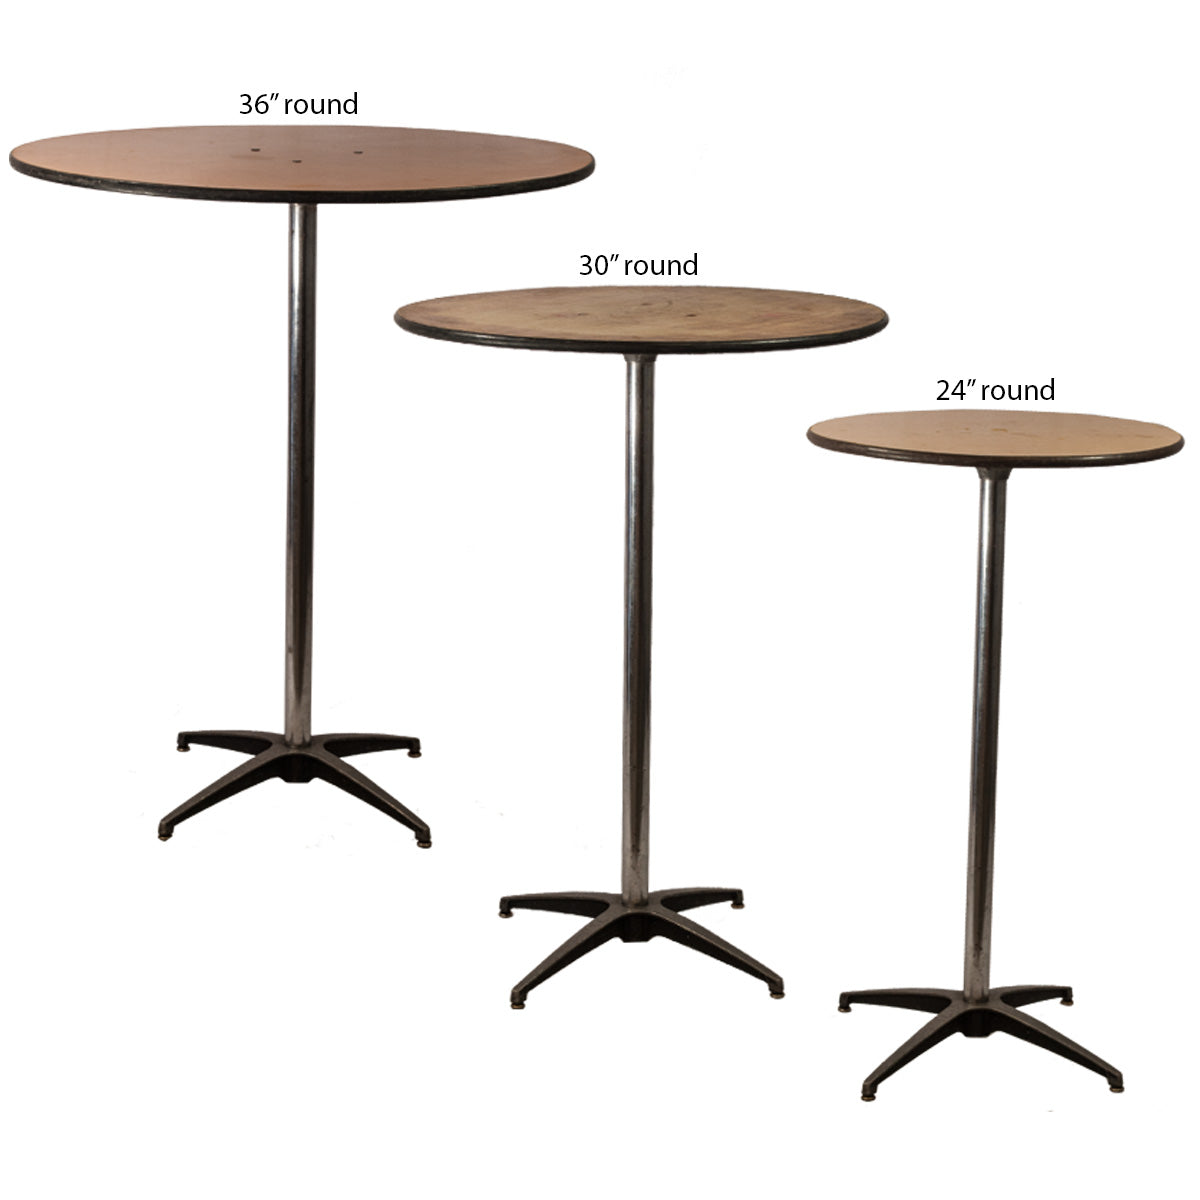 Cocktail Table Tops & Bases ﻿ We are continually adding ...